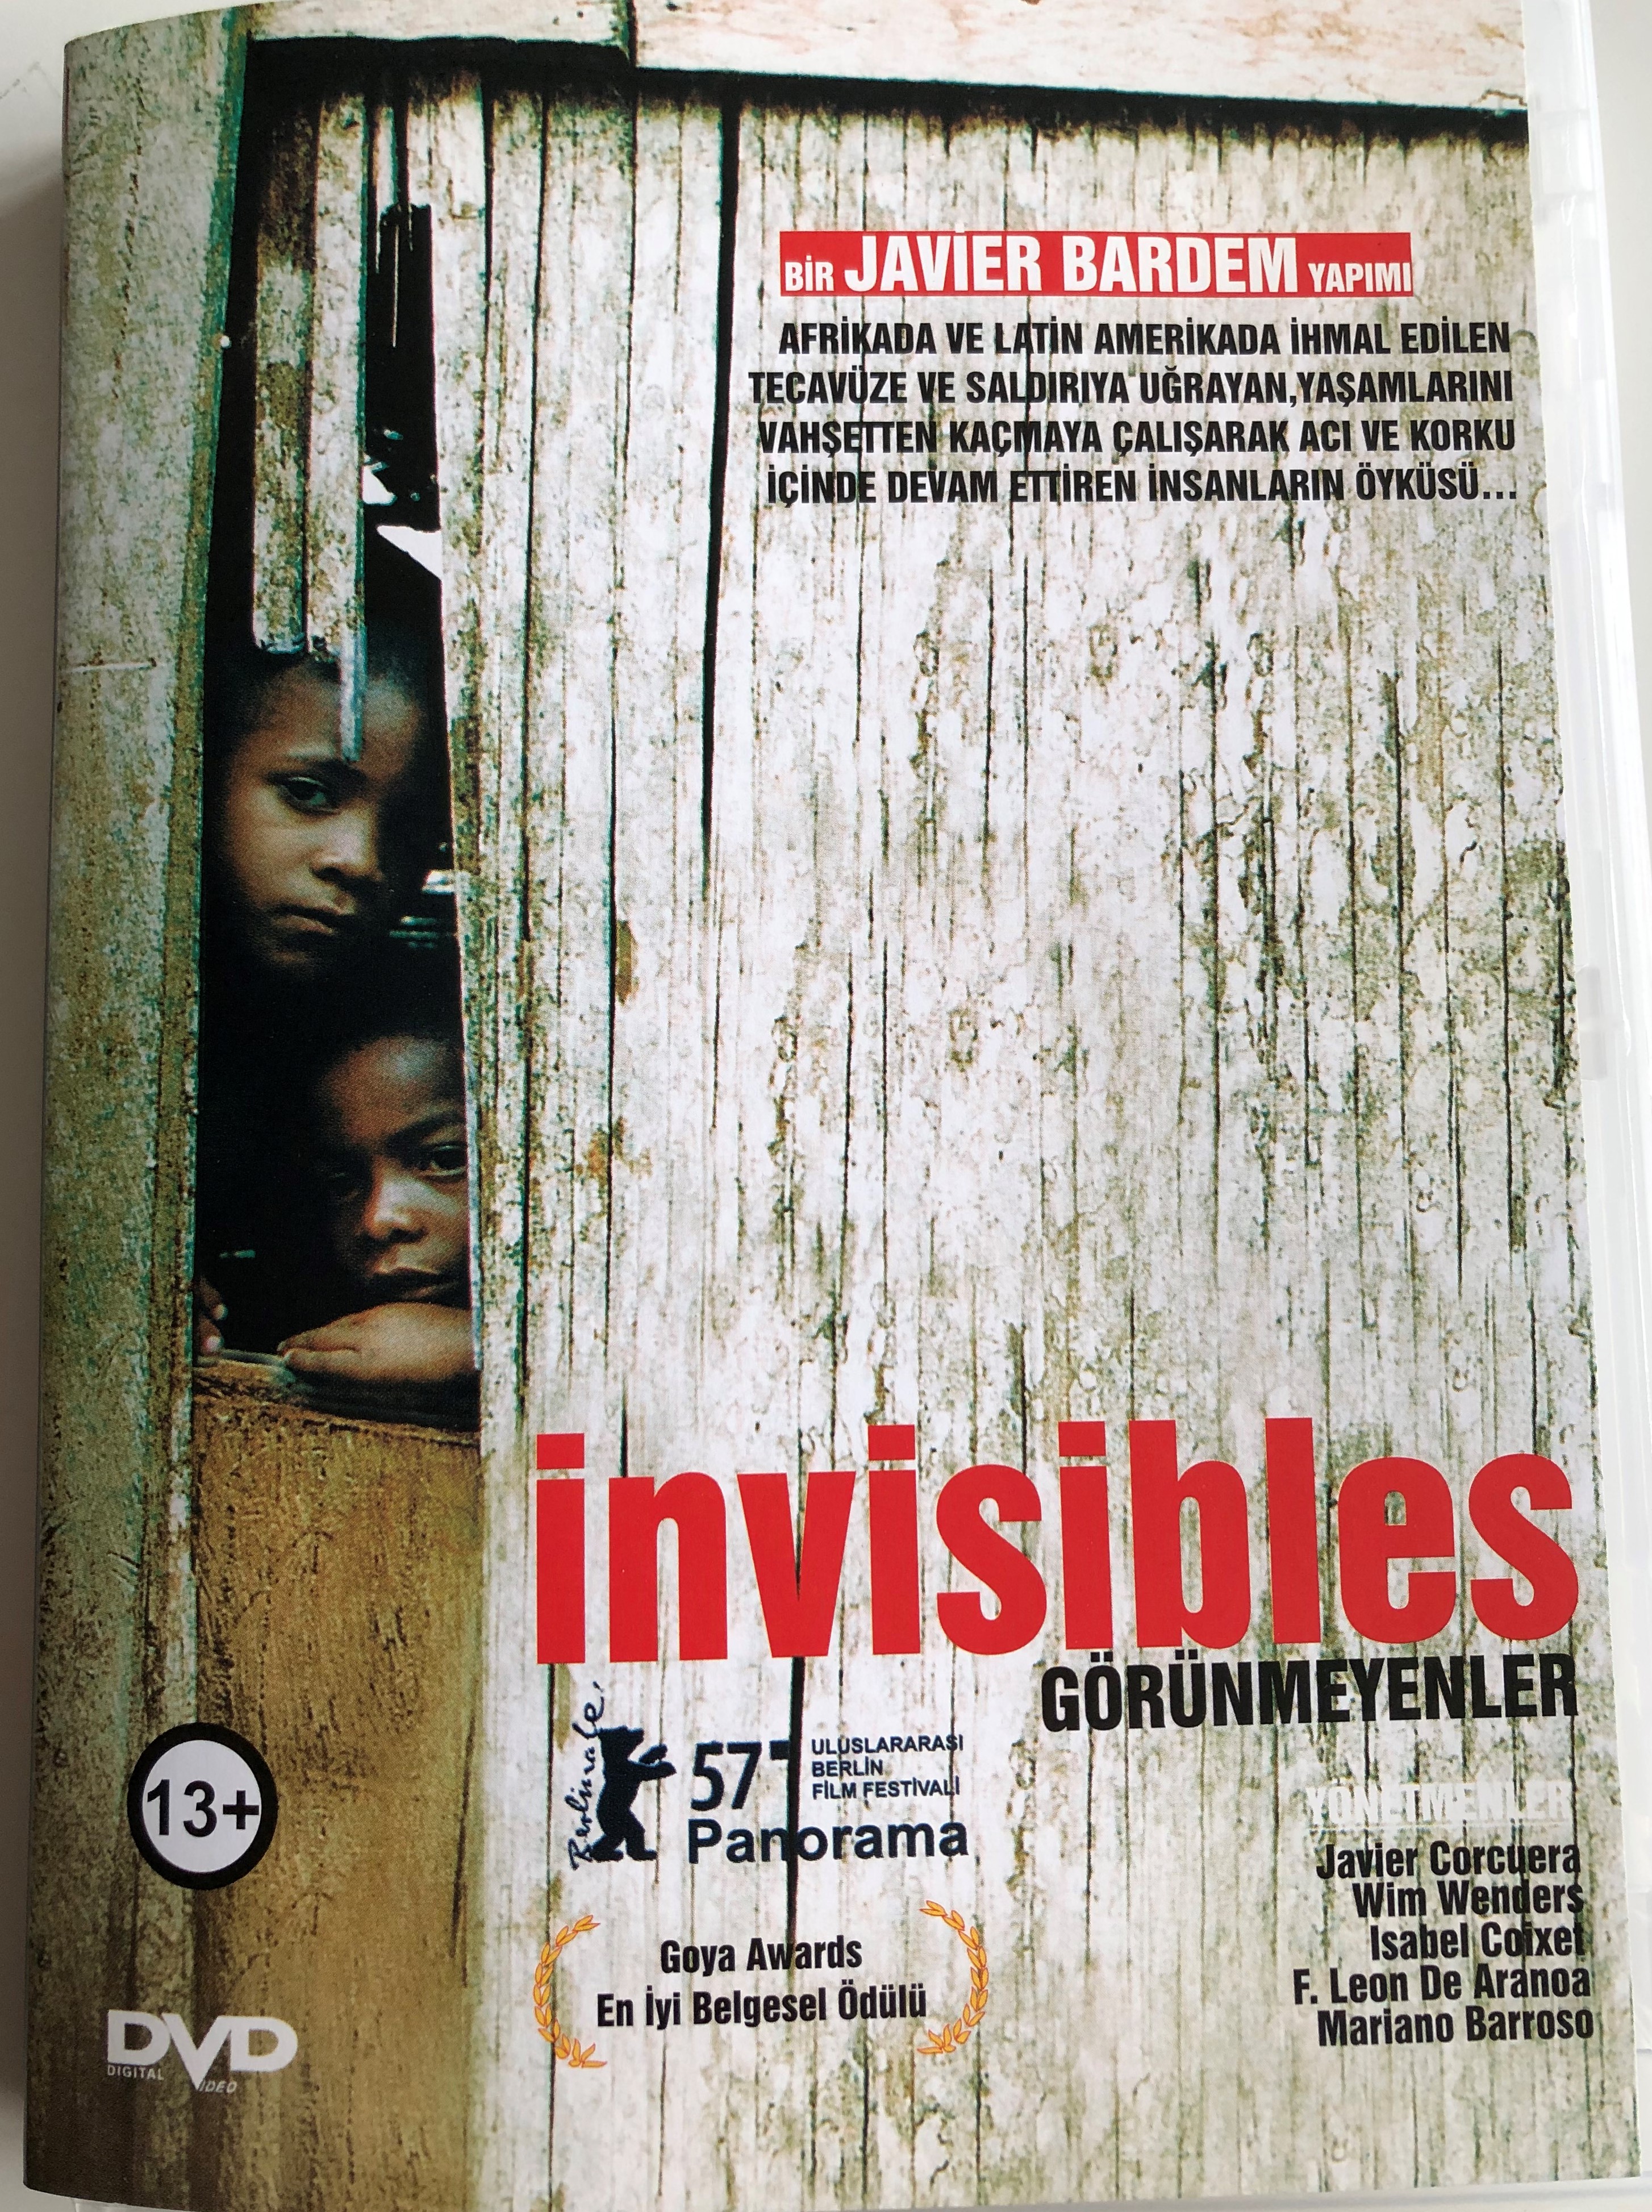 invisibles-dvd-g-r-nmeyenler-directed-by-javier-corcuera-1-.jpg